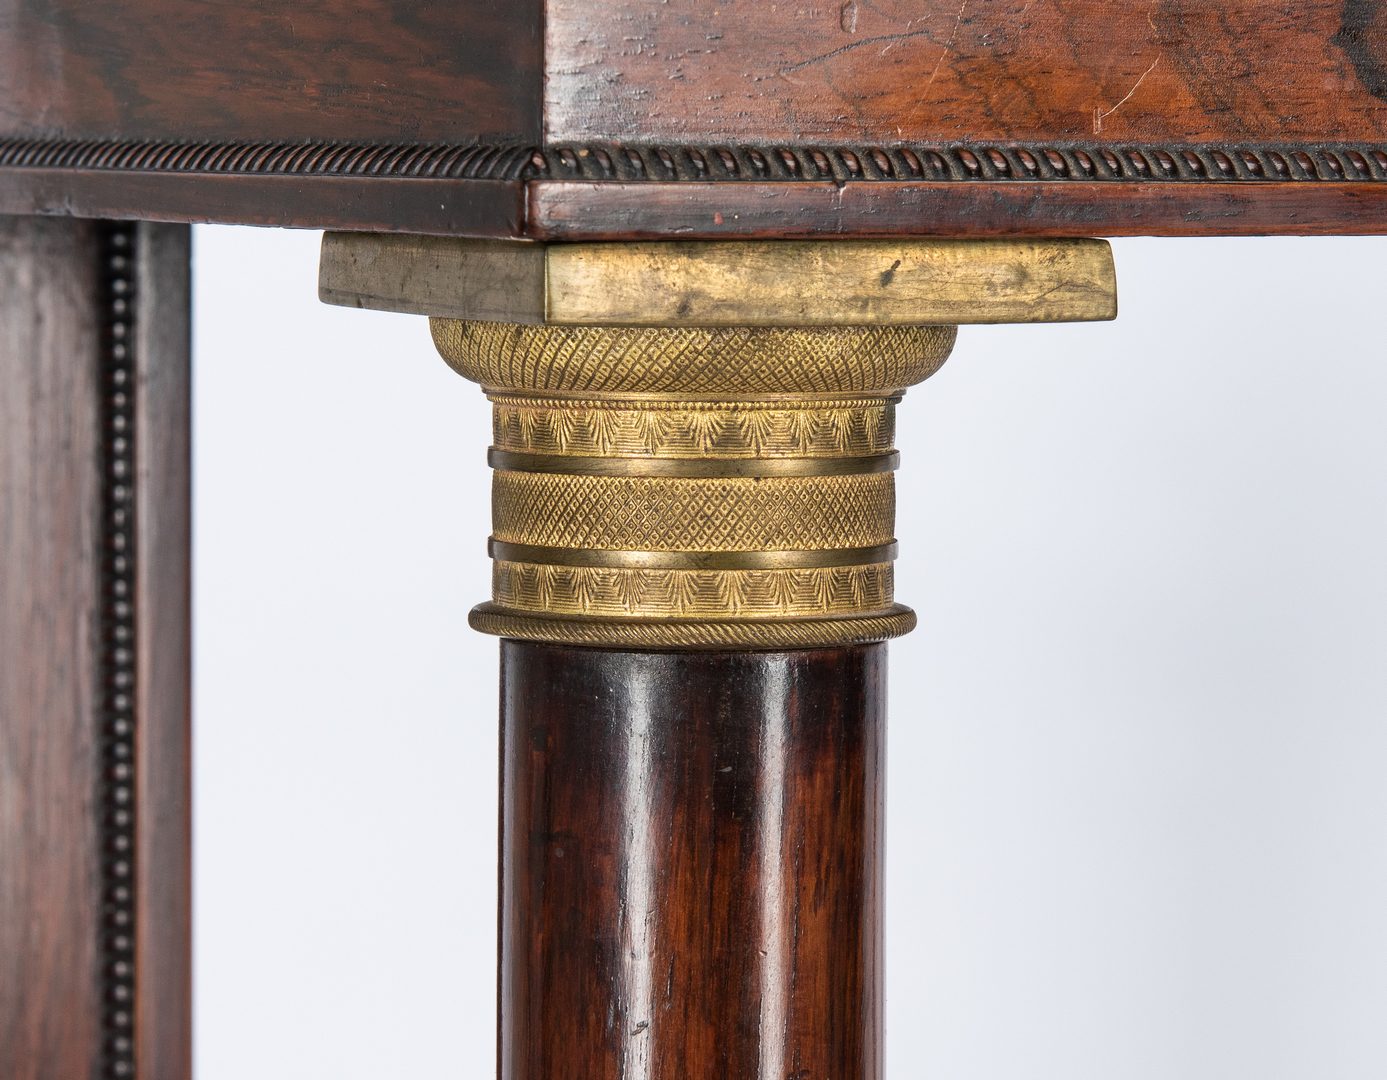 Lot 132: Regency Rosewood Console Table